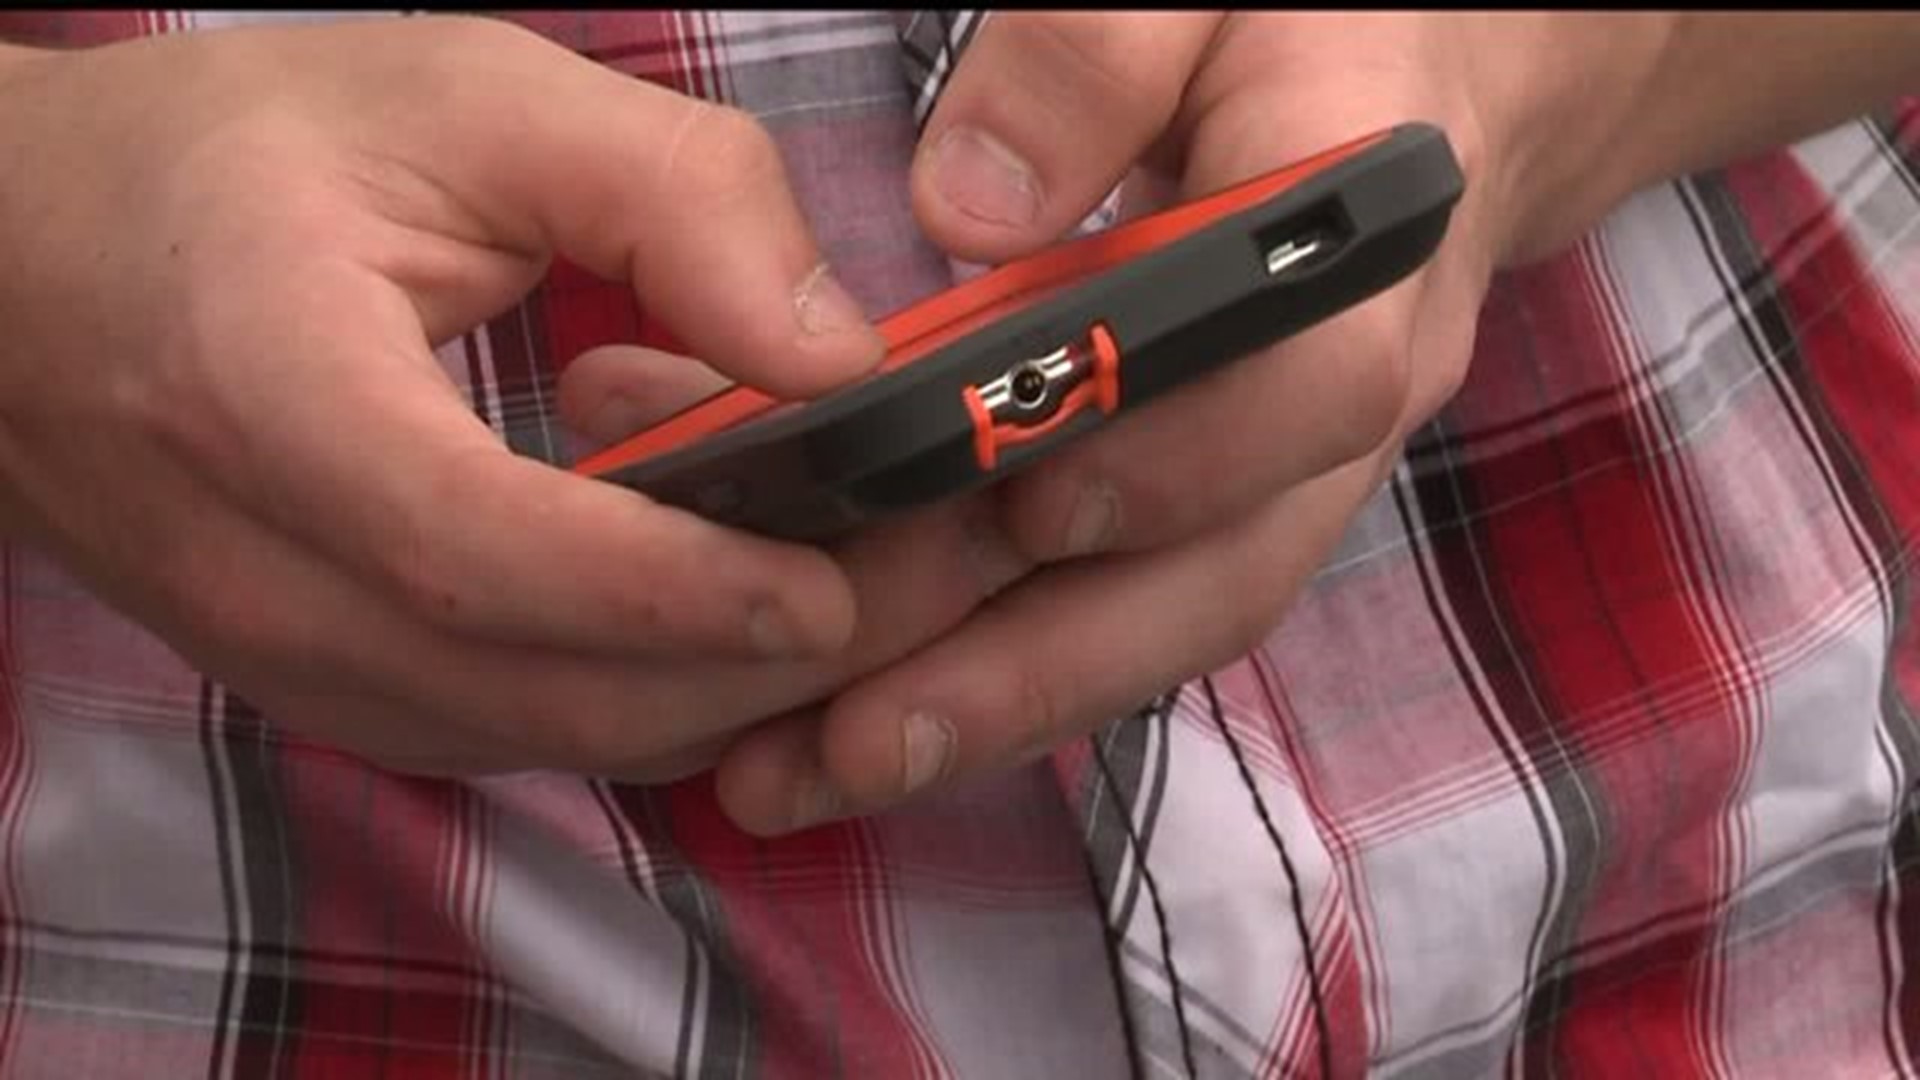 New app fights distracted driving